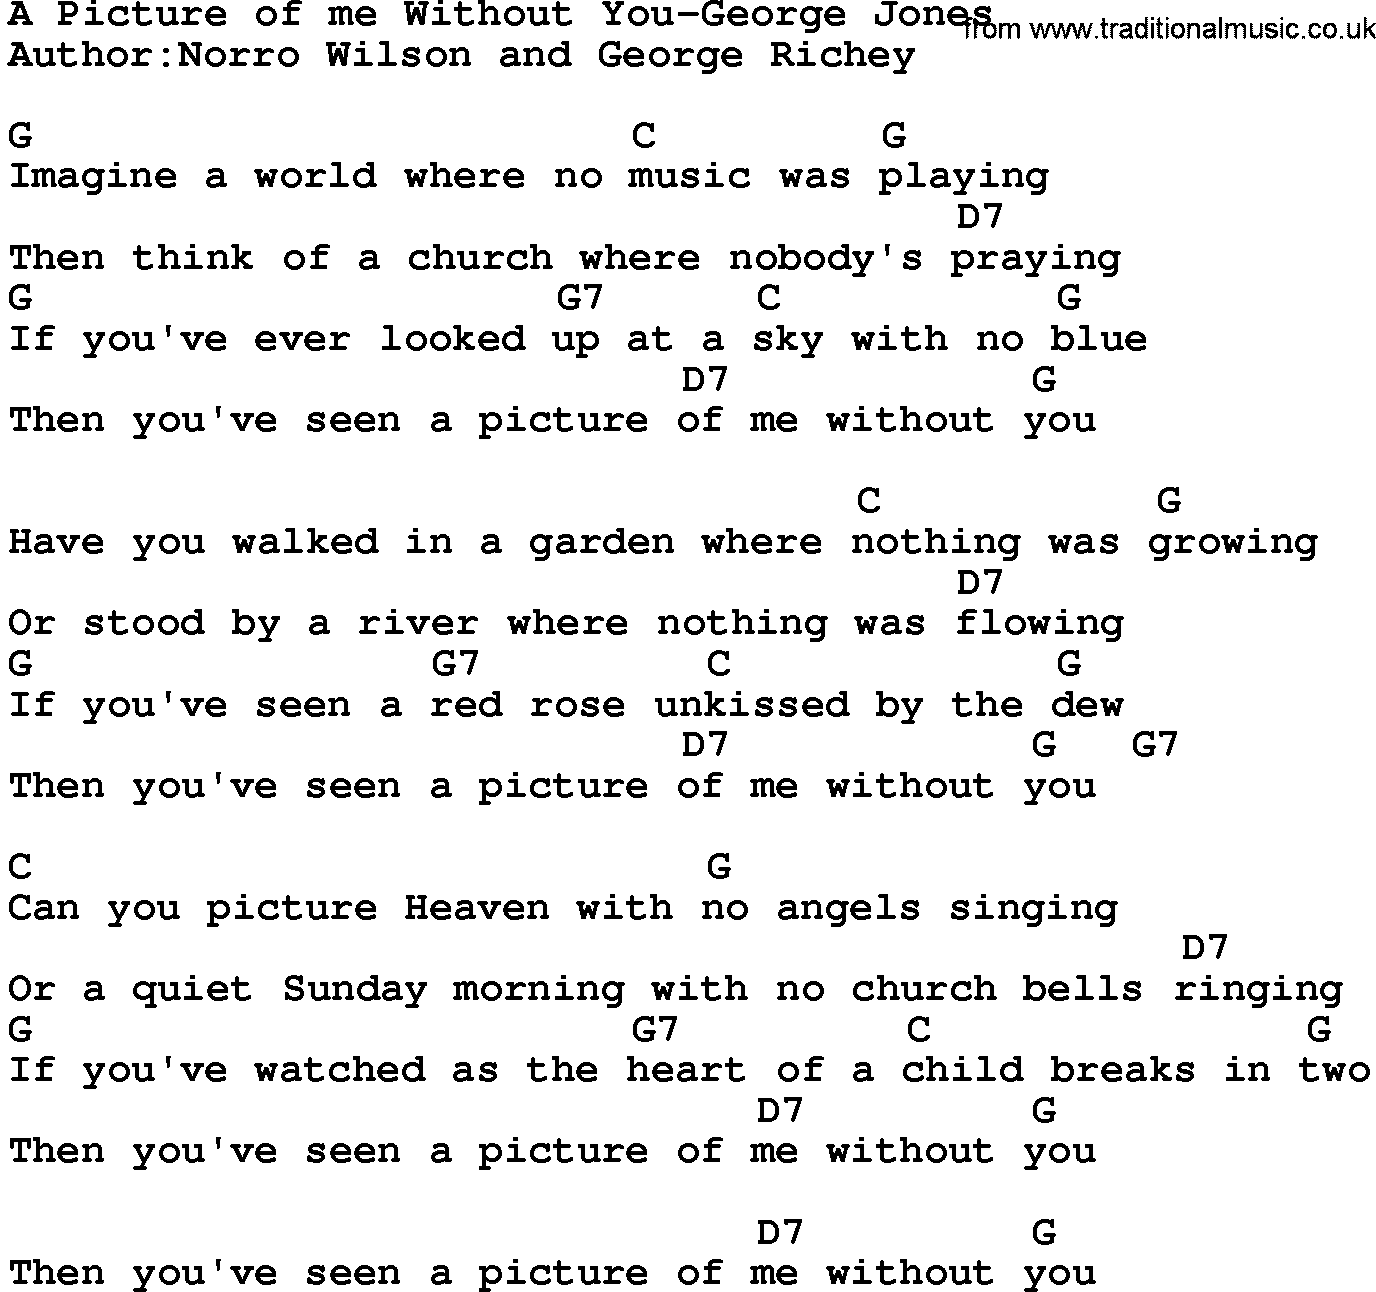 Country music song: A Picture Of Me Without You-George Jones lyrics and chords